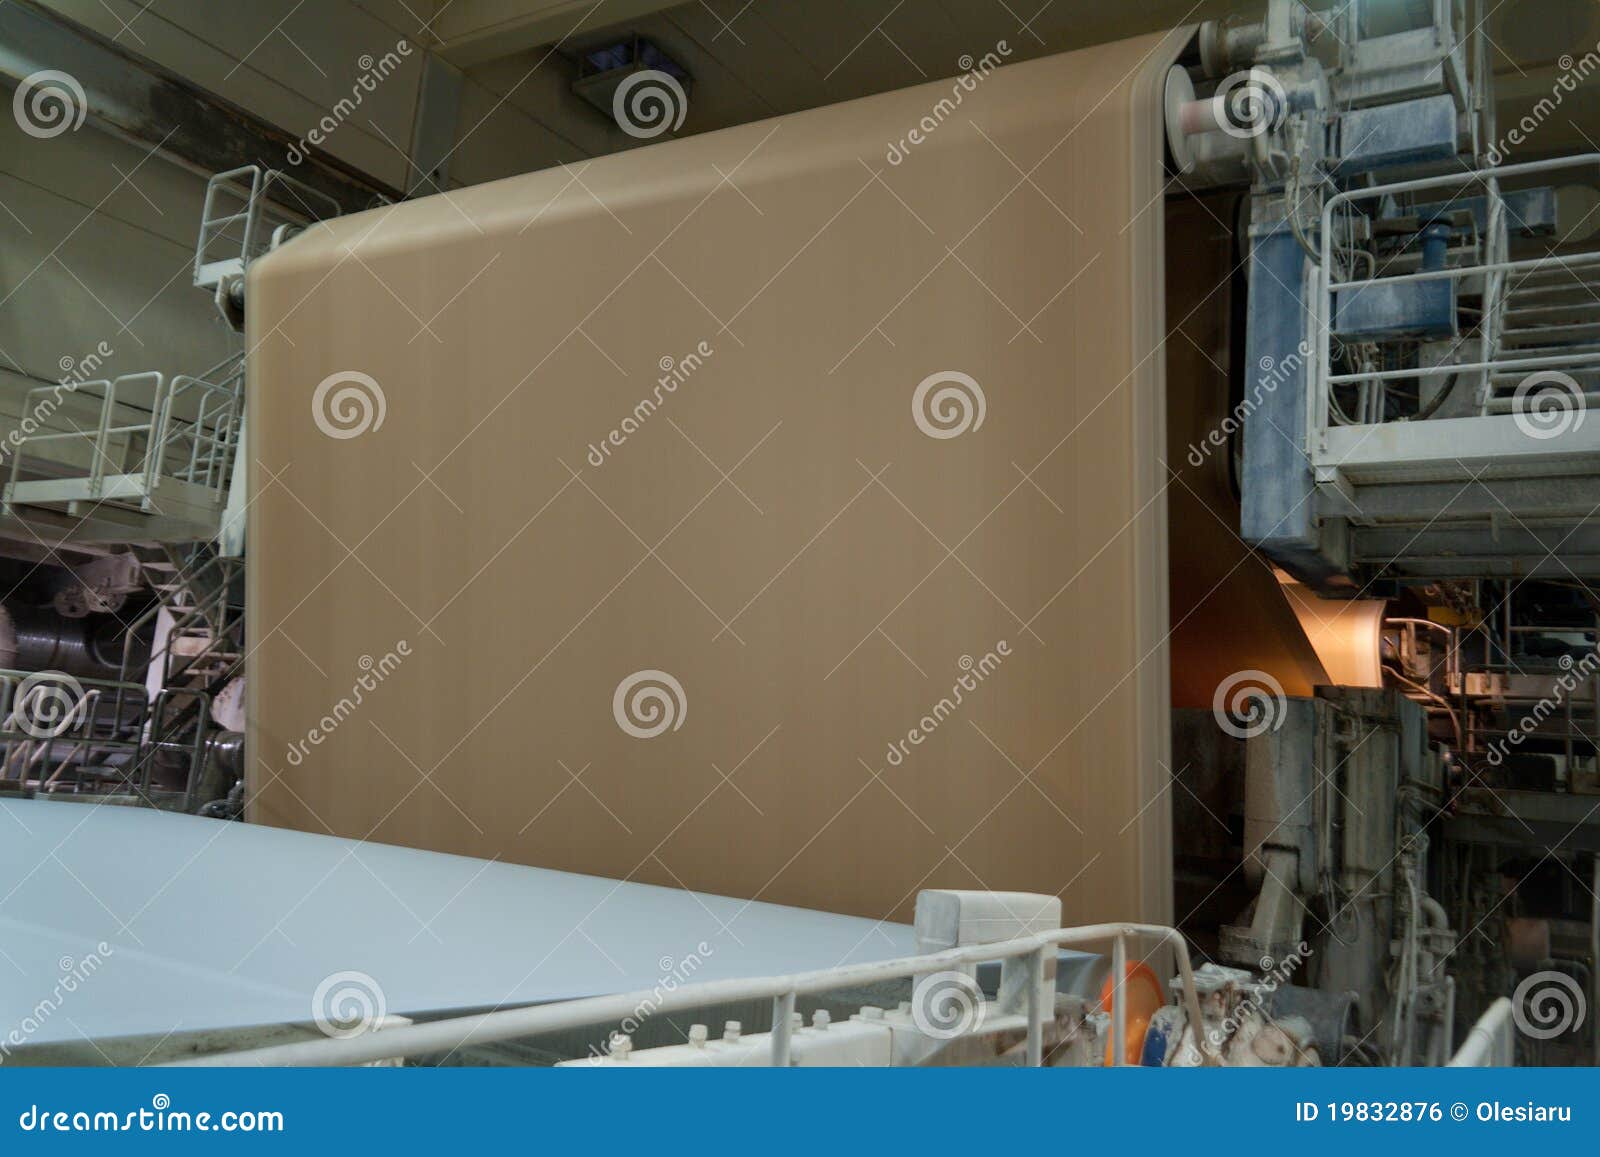 paper production facilities